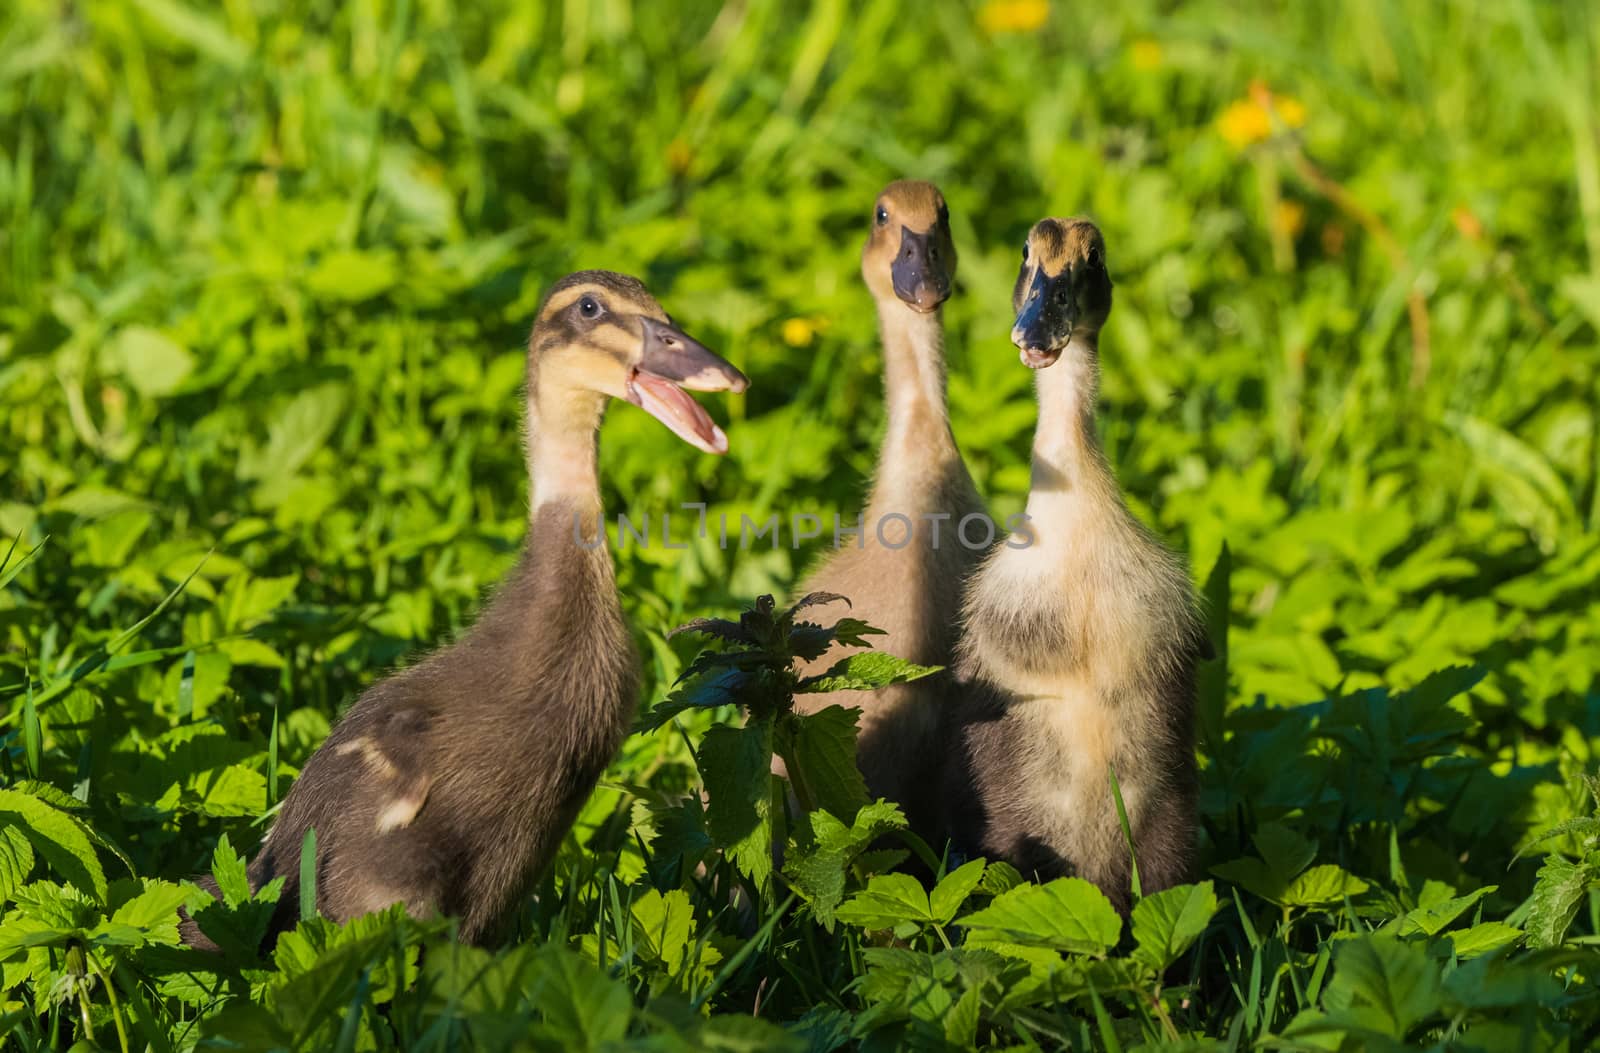 Three Little domestic gray duckling sitting in green grass.